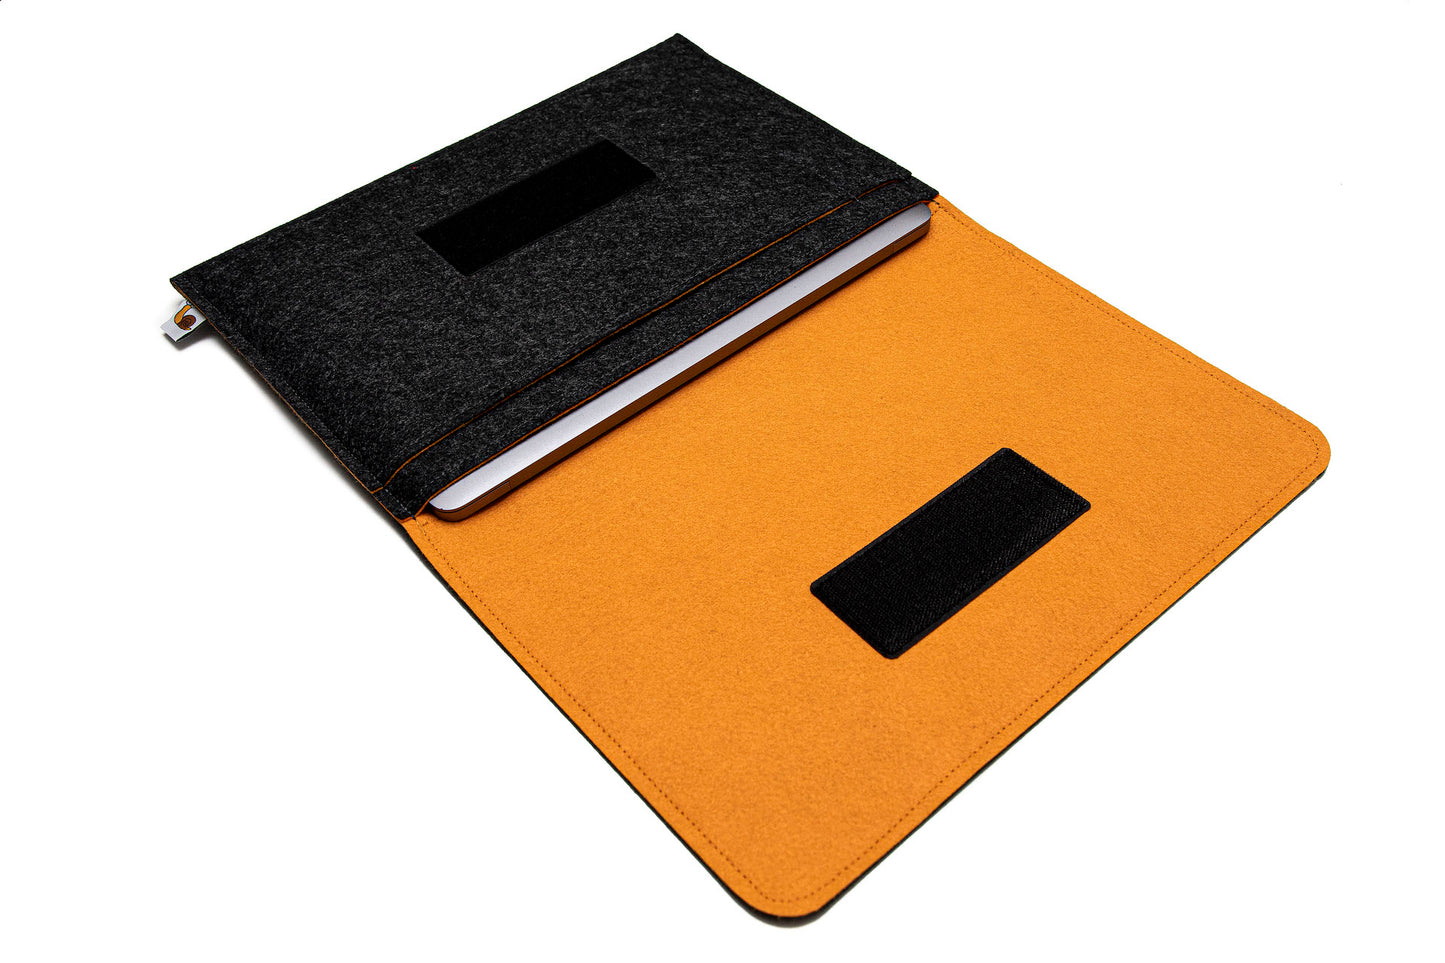 Handmade MacBook Cover with Accessories Pocket: Charcoal & Orange